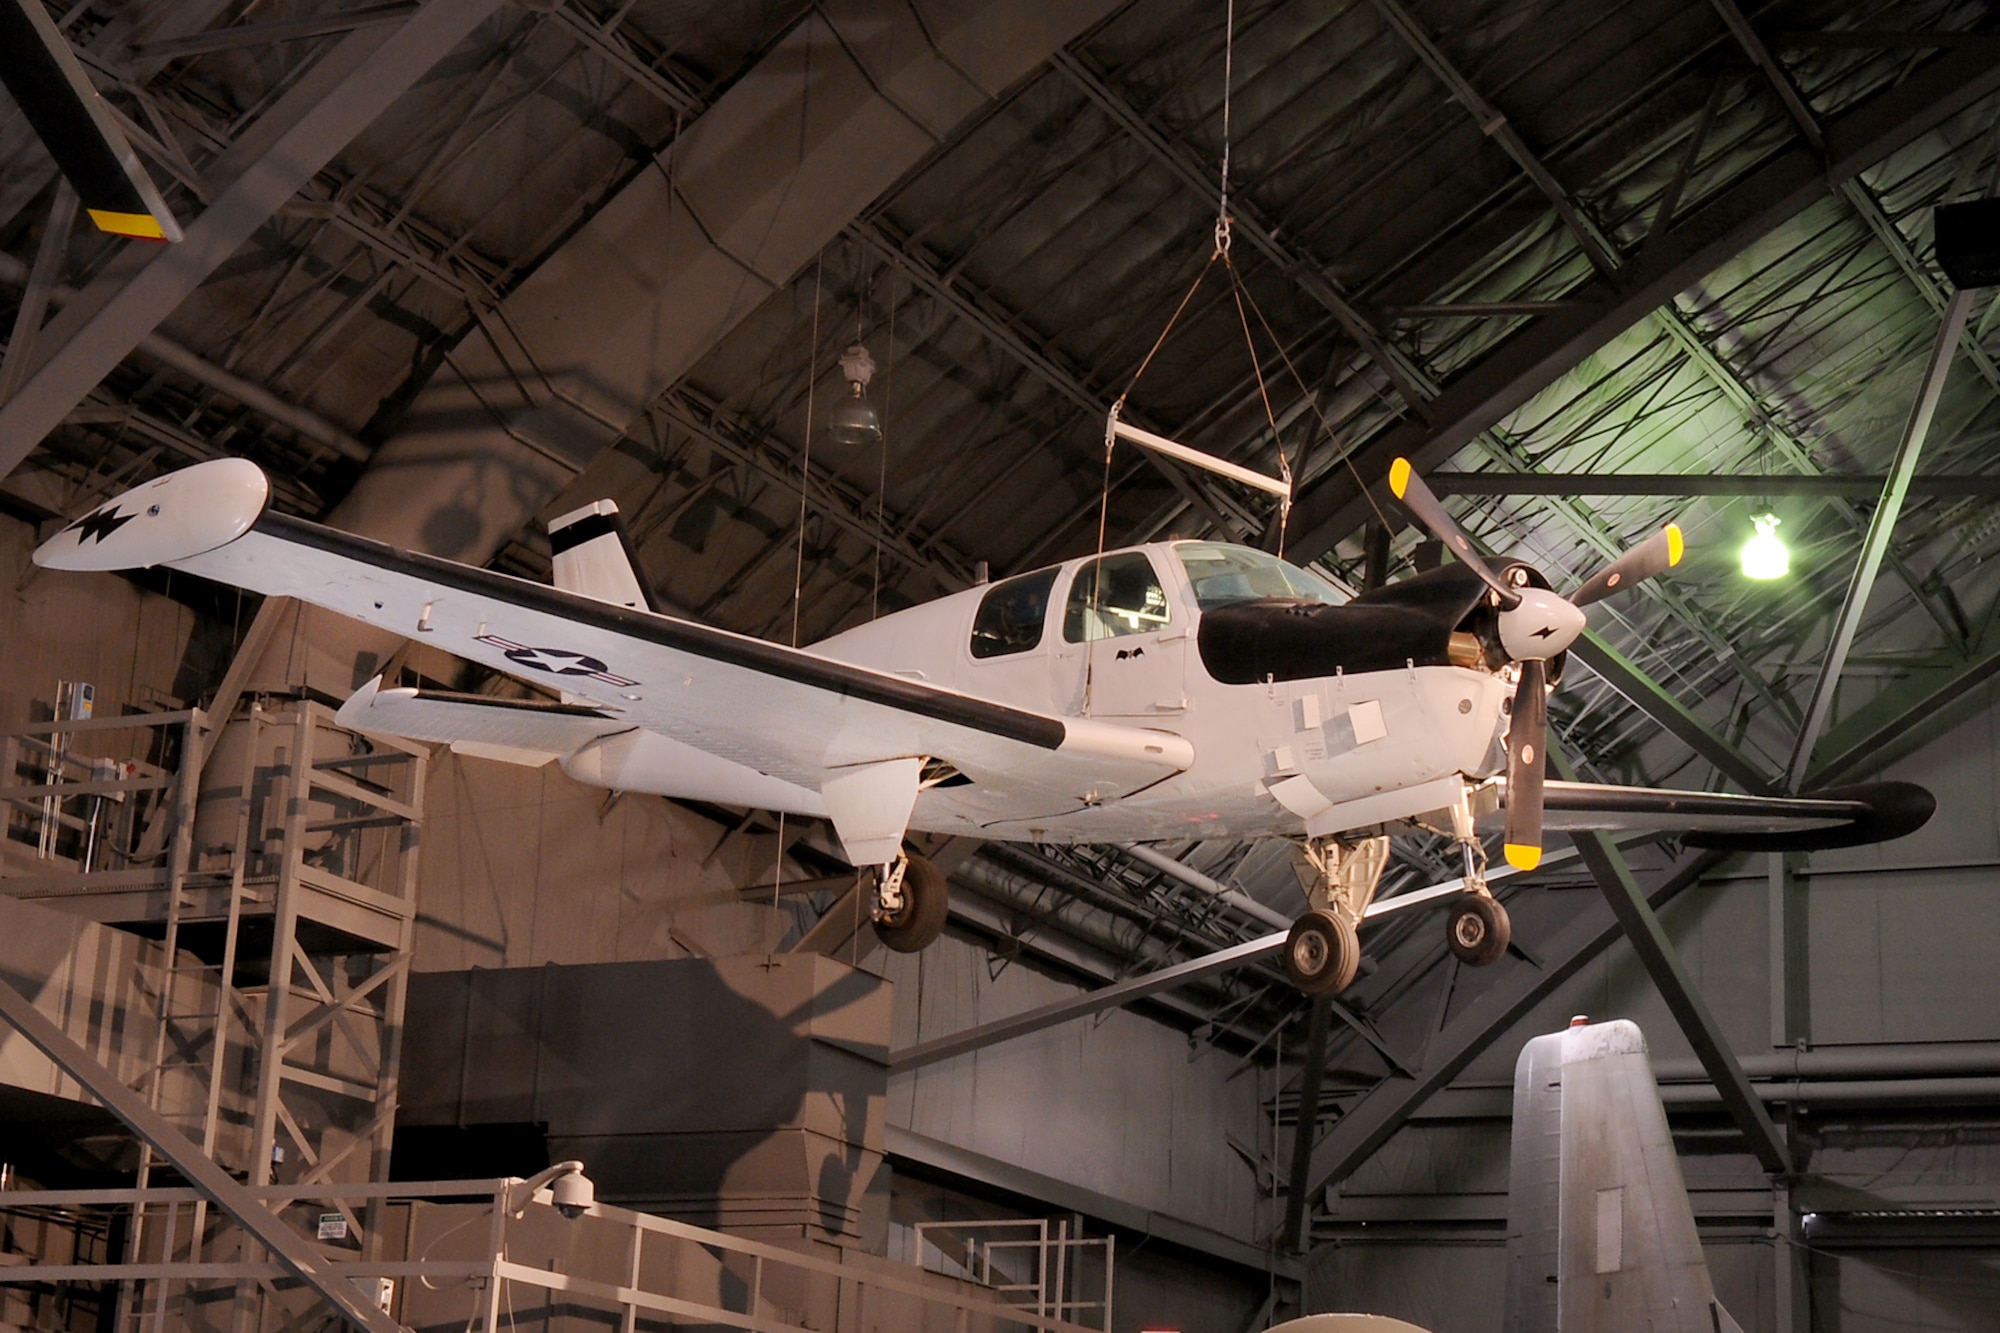 DAYTON, Ohio -- Beech QU-22B in the Southeast Asia War Gallery at the National Museum of the United States Air Force. (U.S. Air Force photo) 
